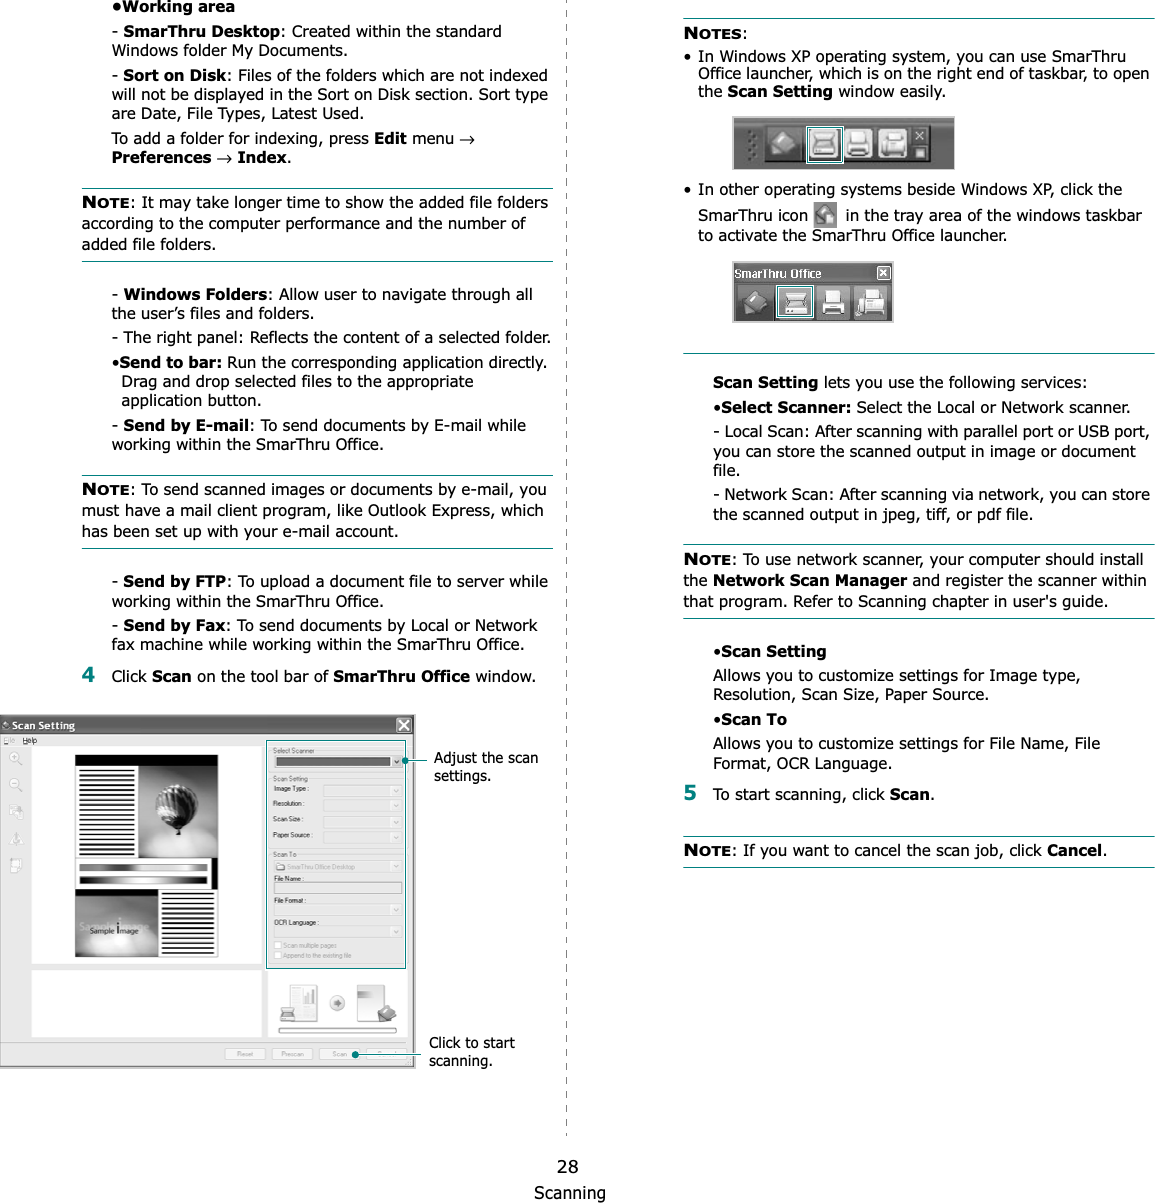 Scanning28•Working area-SmarThru Desktop: Created within the standard Windows folder My Documents.-Sort on Disk: Files of the folders which are not indexed will not be displayed in the Sort on Disk section. Sort type are Date, File Types, Latest Used. To add a folder for indexing, press Edit menu →Preferences→Index.NOTE: It may take longer time to show the added file folders according to the computer performance and the number of added file folders.-Windows Folders: Allow user to navigate through all the user’s files and folders.- The right panel: Reflects the content of a selected folder.•Send to bar: Run the corresponding application directly. Drag and drop selected files to the appropriate application button.-Send by E-mail: To send documents by E-mail while working within the SmarThru Office.NOTE: To send scanned images or documents by e-mail, you must have a mail client program, like Outlook Express, which has been set up with your e-mail account.-Send by FTP: To upload a document file to server while working within the SmarThru Office.-Send by Fax: To send documents by Local or Network fax machine while working within the SmarThru Office.4Click Scan on the tool bar of SmarThru Office window.Adjust the scan settings.Click to start scanning.NOTES:• In Windows XP operating system, you can use SmarThru Office launcher, which is on the right end of taskbar, to open the Scan Setting window easily.• In other operating systems beside Windows XP, click the SmarThru icon   in the tray area of the windows taskbar to activate the SmarThru Office launcher.Scan Setting lets you use the following services:•Select Scanner: Select the Local or Network scanner. - Local Scan: After scanning with parallel port or USB port, you can store the scanned output in image or document file.- Network Scan: After scanning via network, you can store the scanned output in jpeg, tiff, or pdf file.NOTE: To use network scanner, your computer should install the Network Scan Manager and register the scanner within that program. Refer to Scanning chapter in user&apos;s guide.•Scan SettingAllows you to customize settings for Image type, Resolution, Scan Size, Paper Source.•Scan ToAllows you to customize settings for File Name, File Format, OCR Language.5To start scanning, click Scan.NOTE: If you want to cancel the scan job, click Cancel.